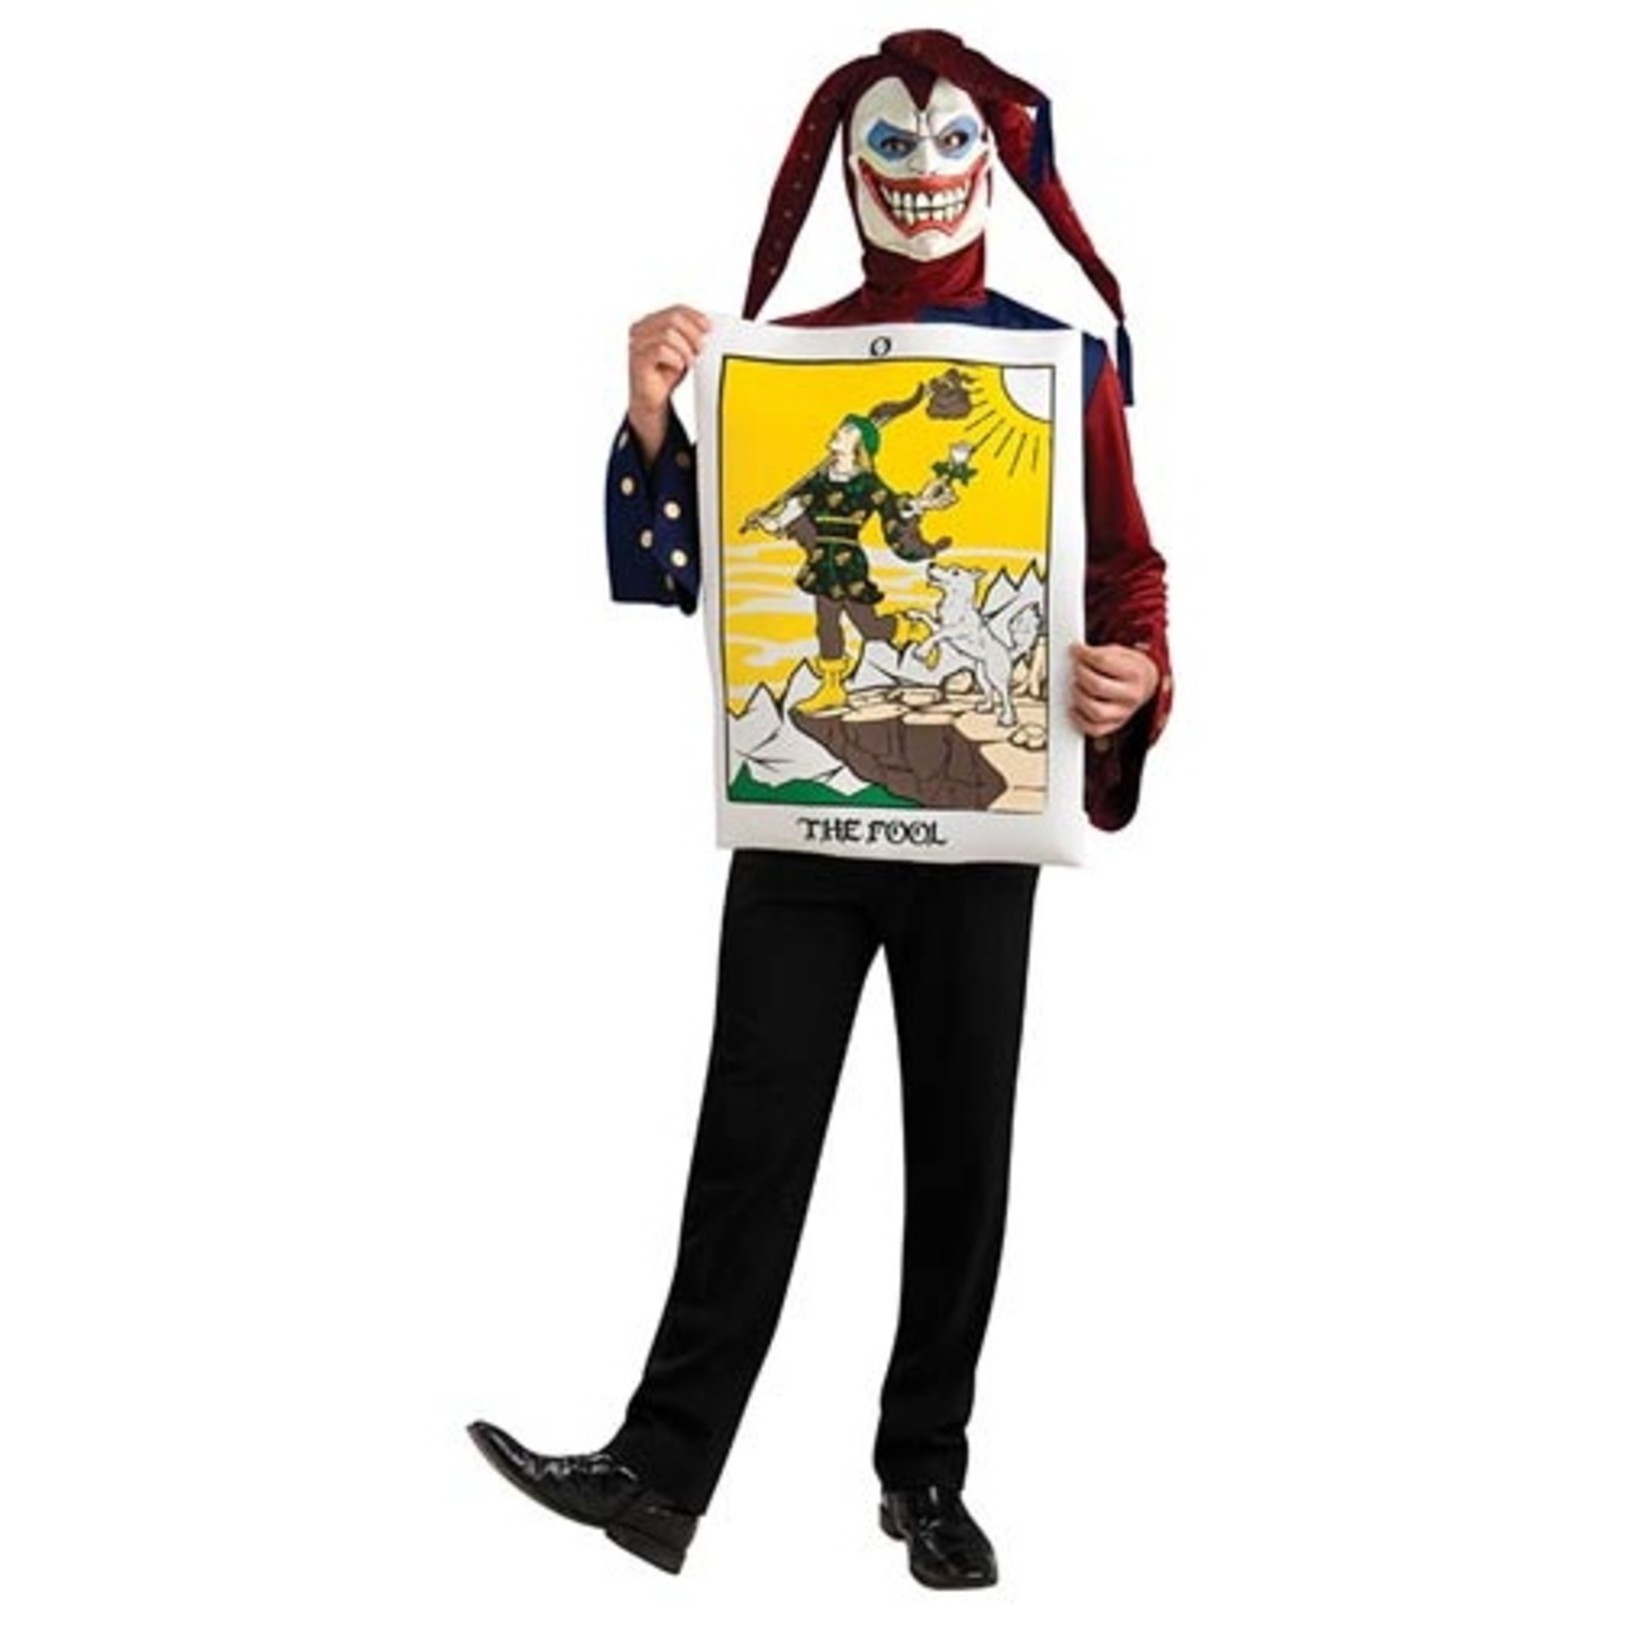 Costume-The Fool Joker-Adult Standard - Victoria Party Store